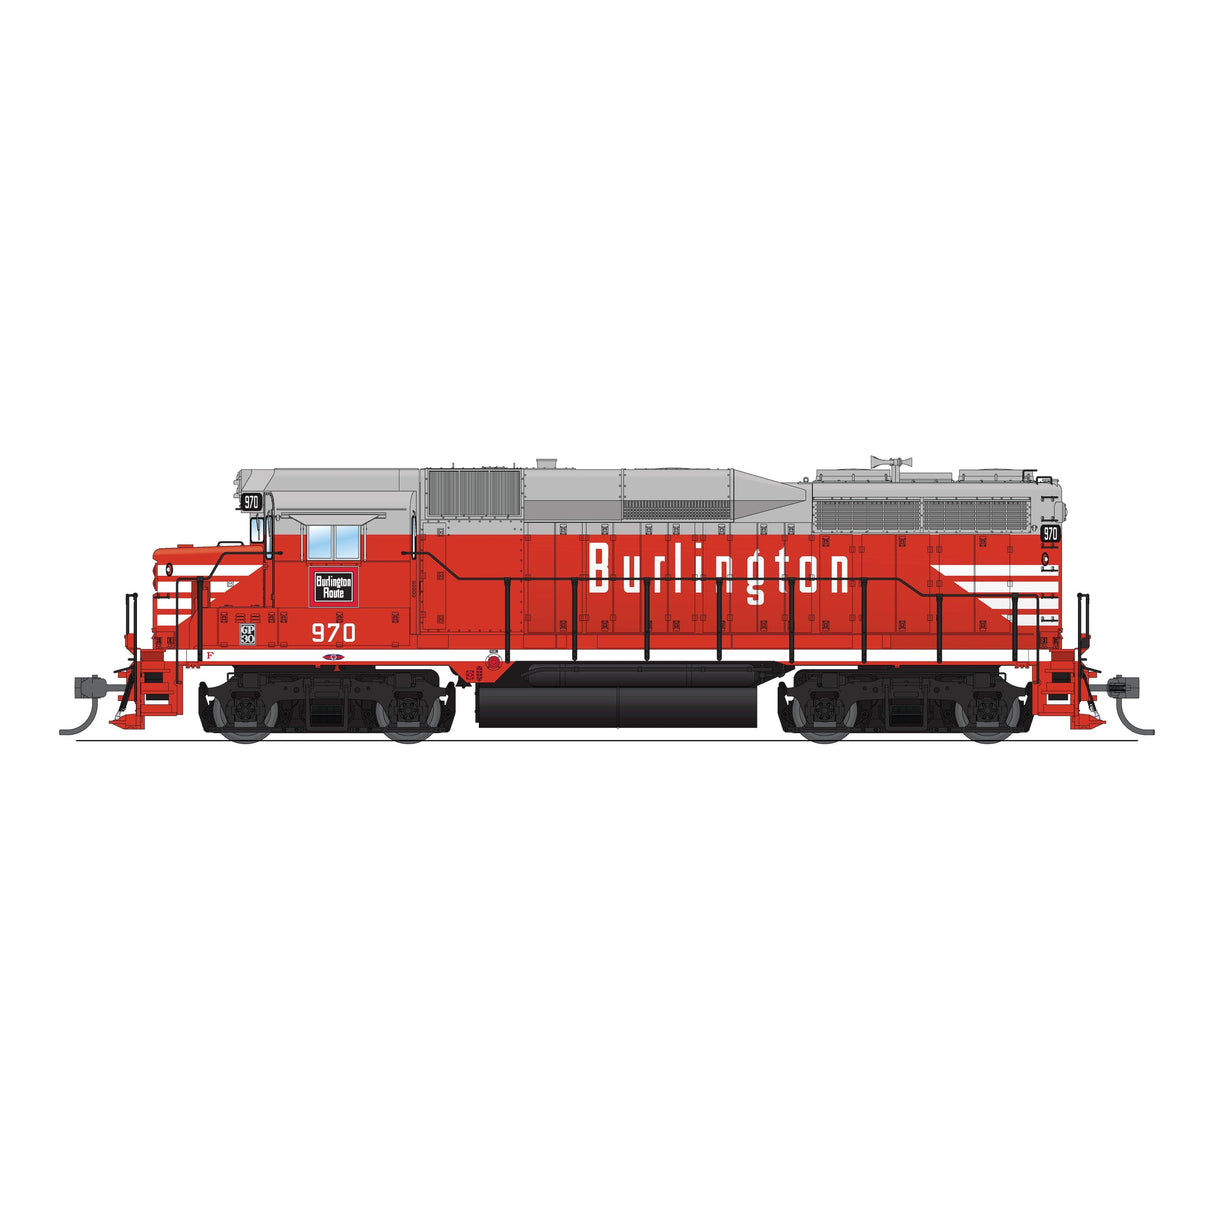 Broadway Limited HO Scale EMD GP30 CBQ 970 Chinese Red Paragon4 Sound/DC/DCC HO